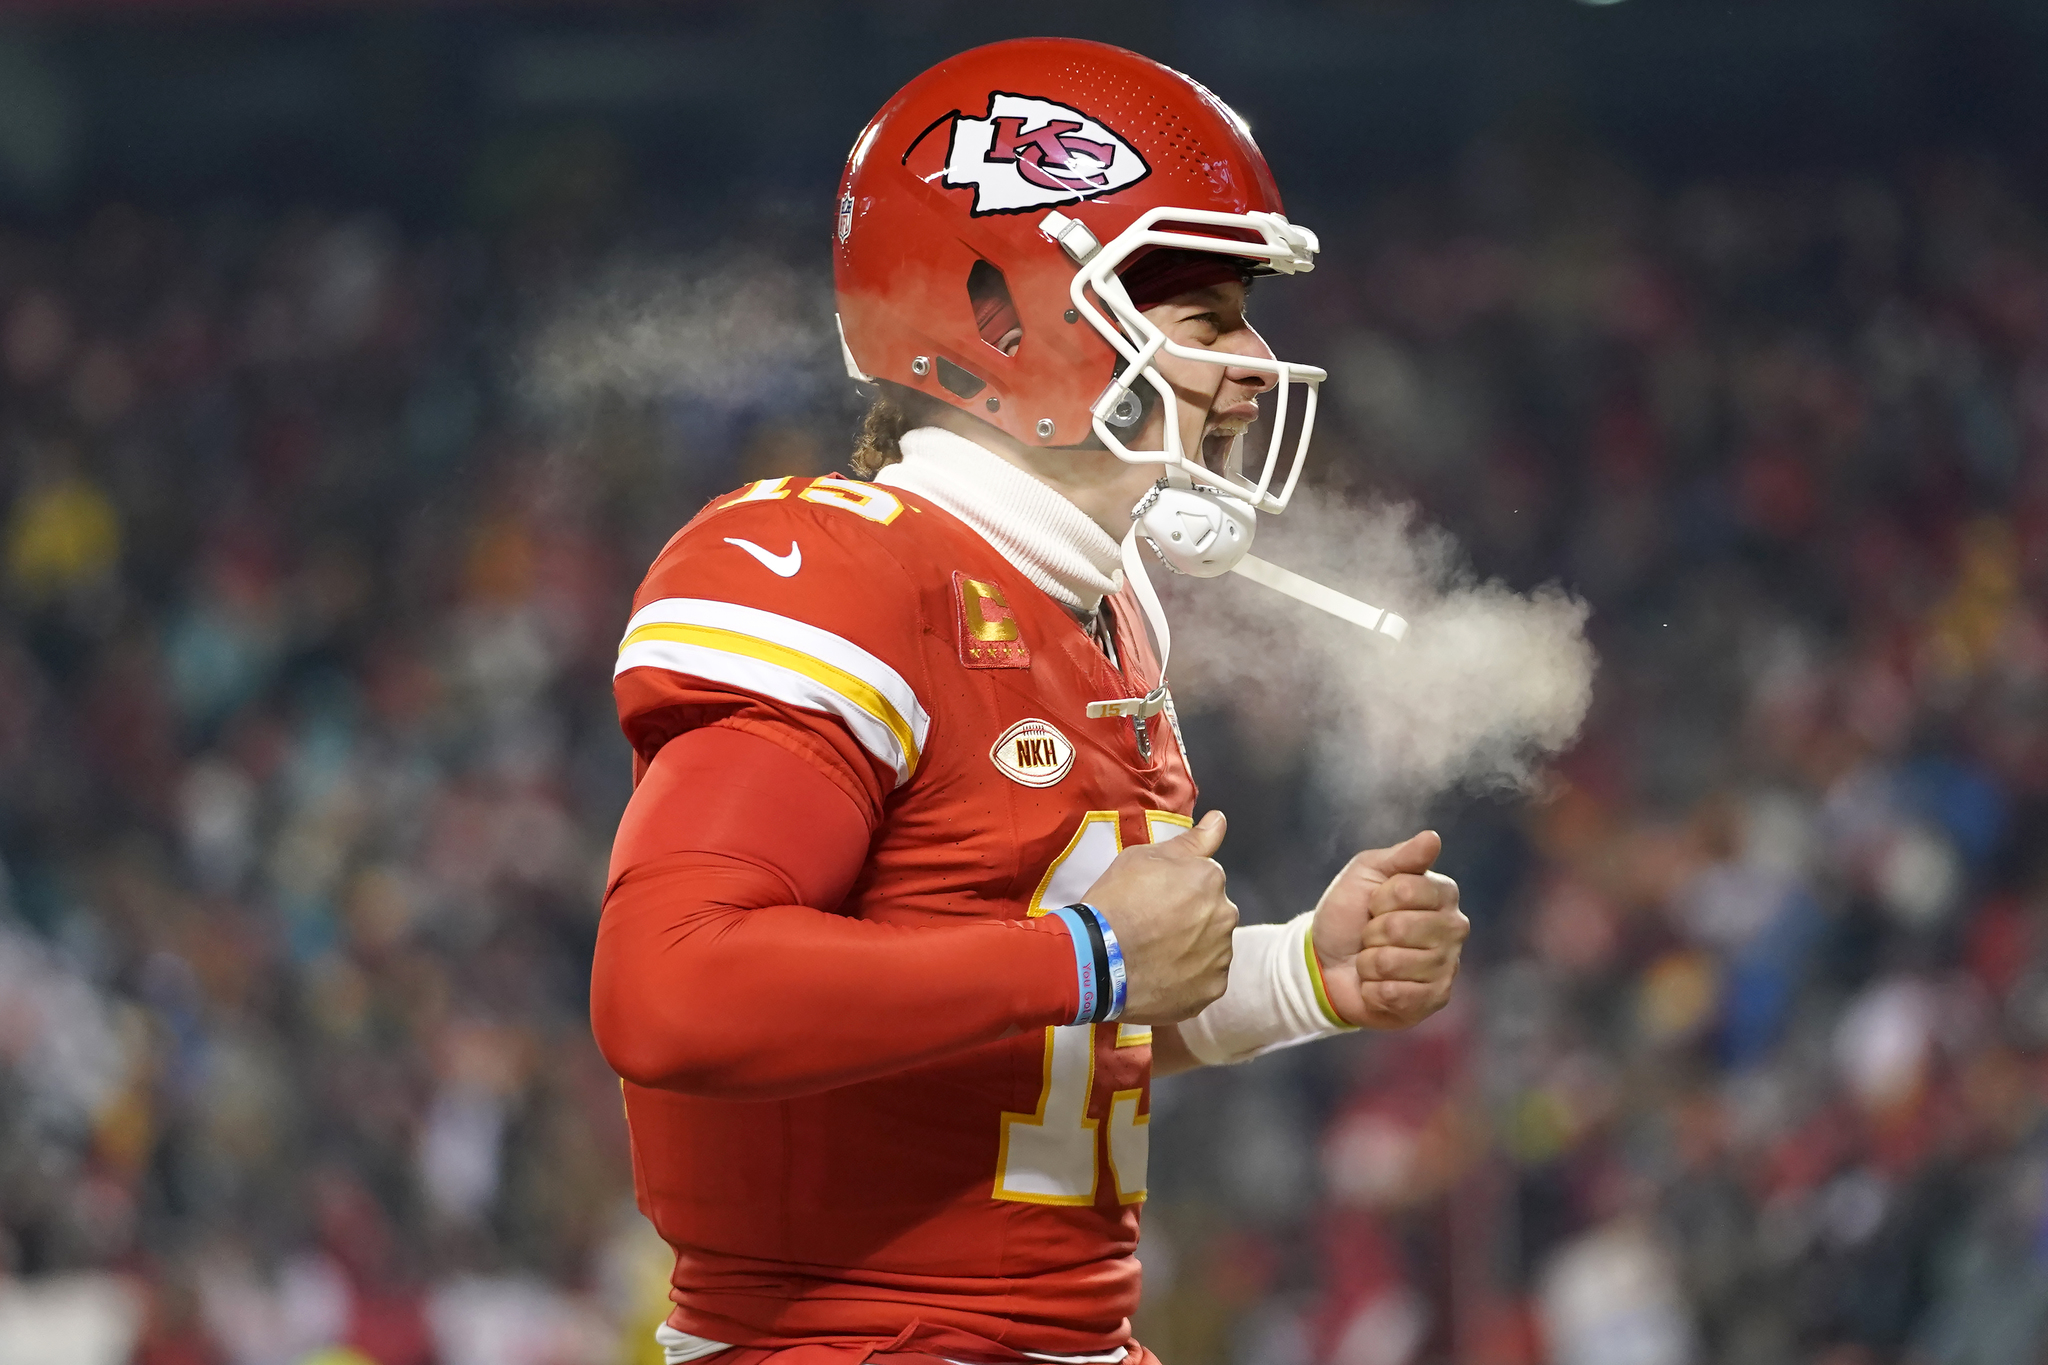 Patrick Mahomes celebrates the Chiefs win against the Dolphins on Saturday night.